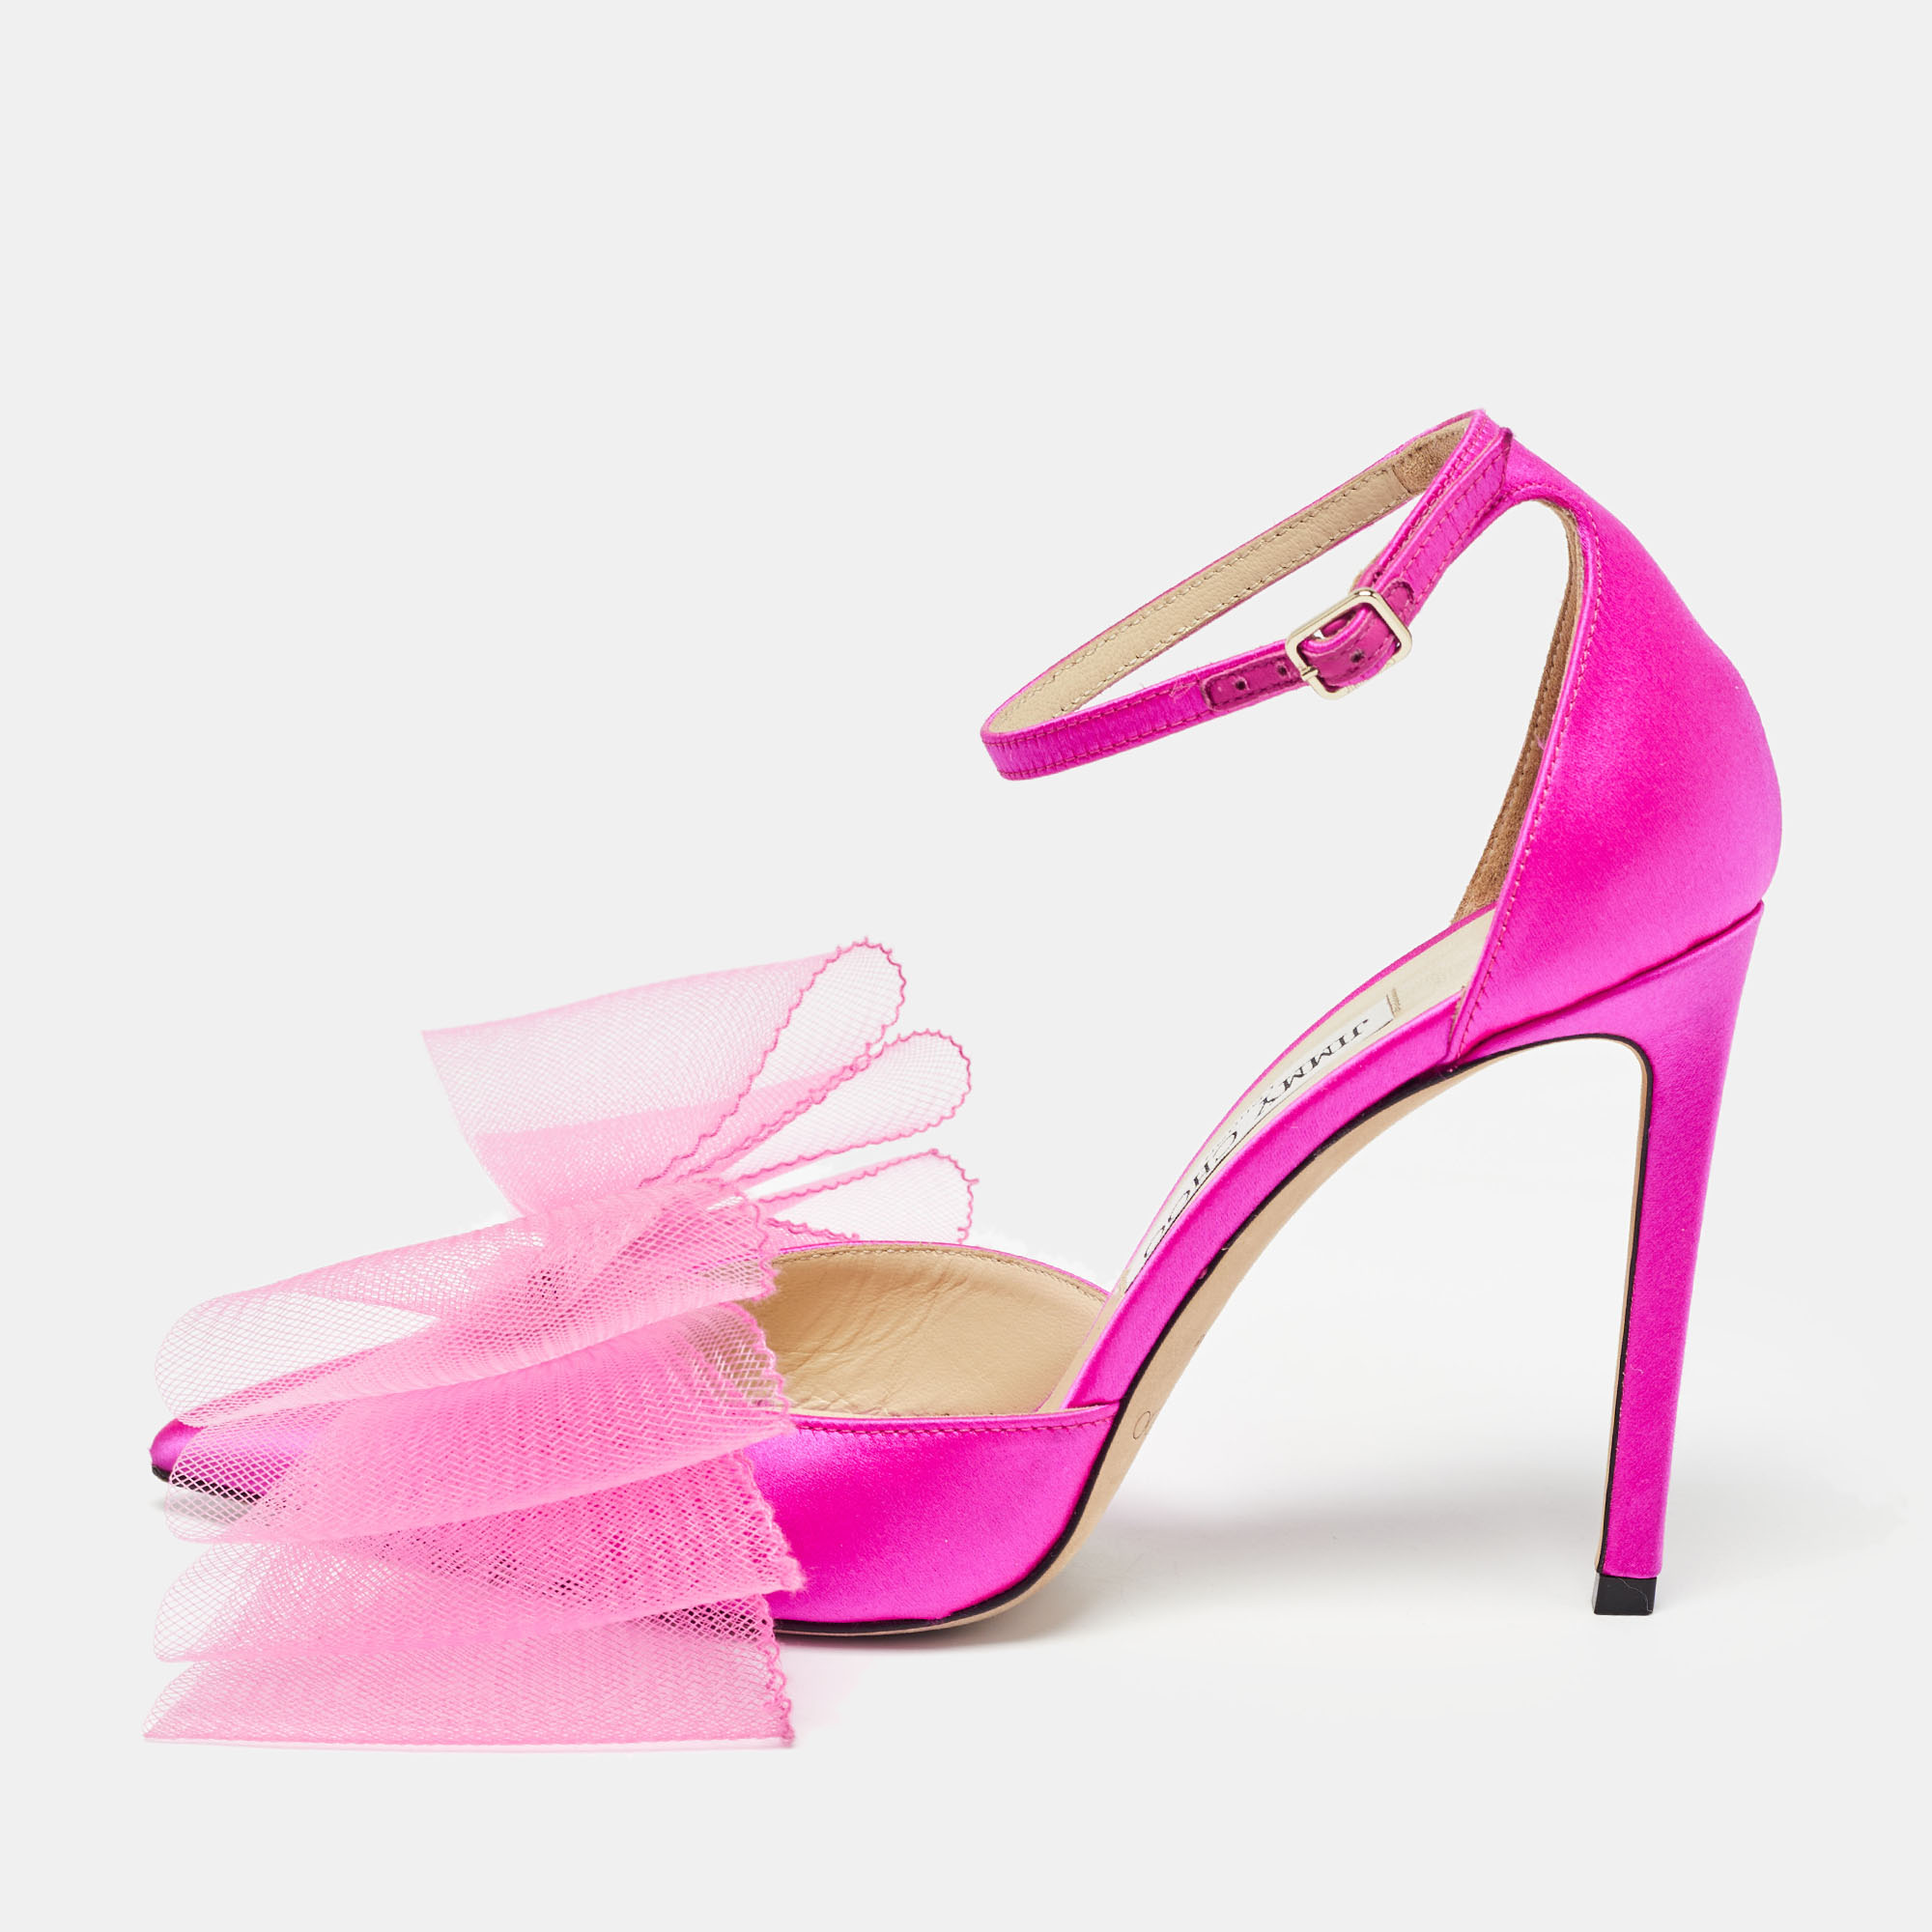 Jimmy choo pink satin bow ankle strap pumps size 38.5